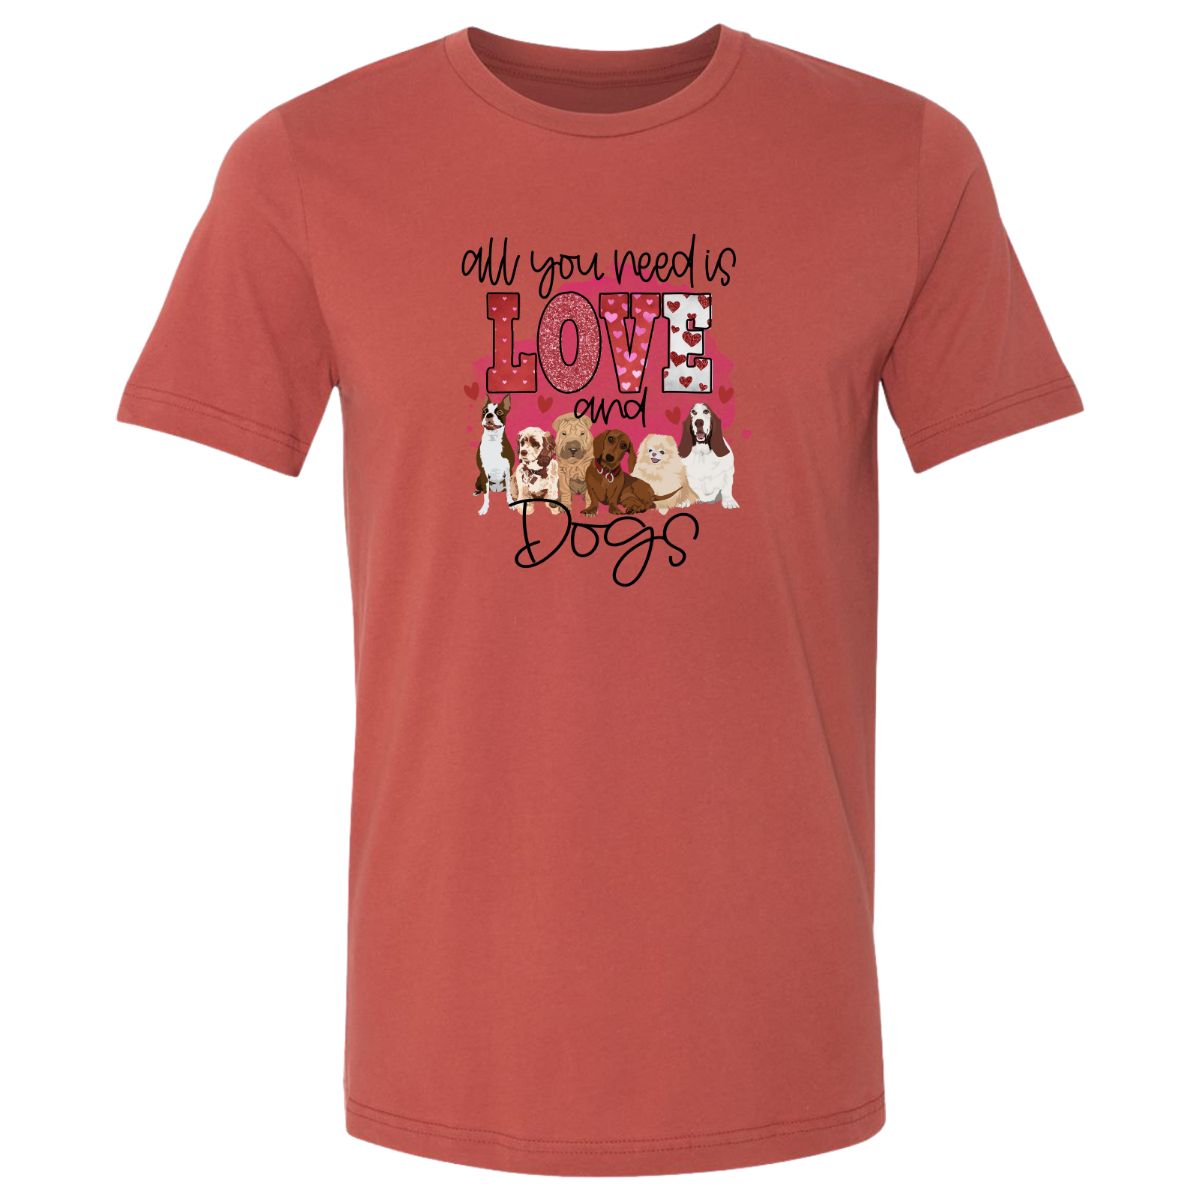 All You Need Is LOVE and Dogs Design